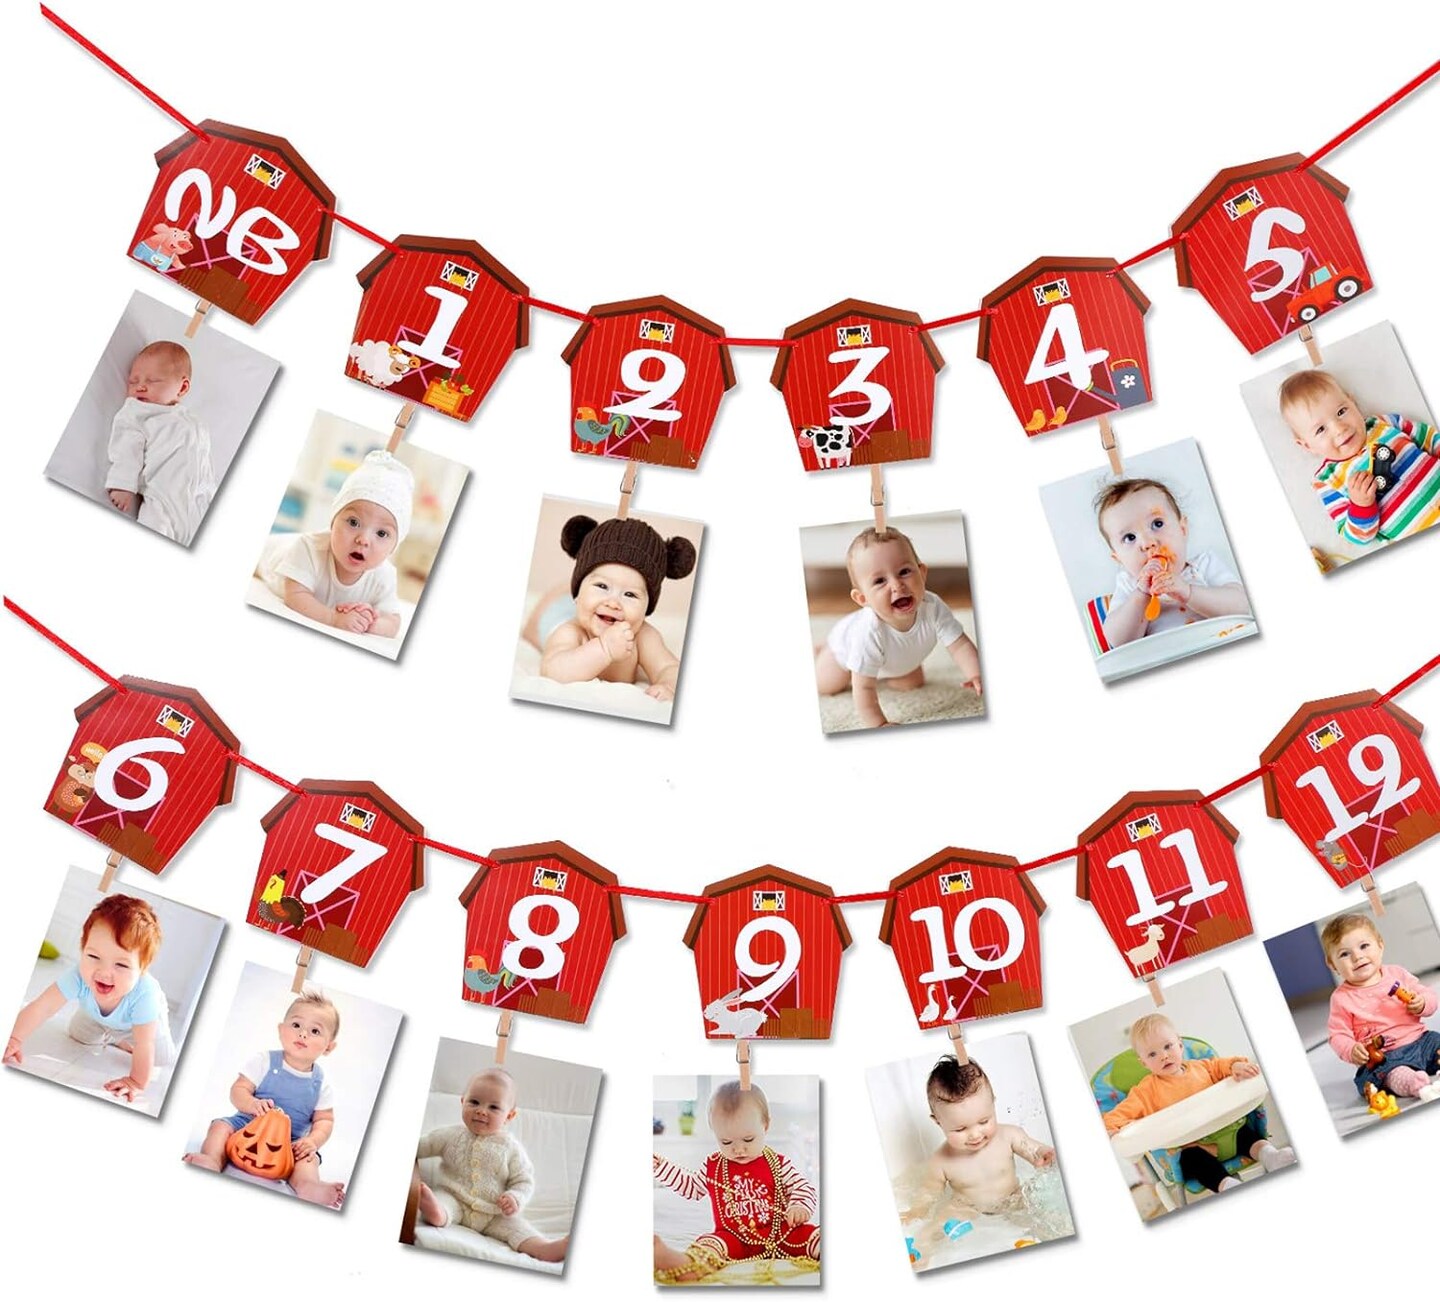 Farm Animal Theme Photo Banner 1st Birthday Monthly Banner Newborn to 12 Month Photo Display Milestone Photograph for Barnyard First Birthday Party Decorations Supplies